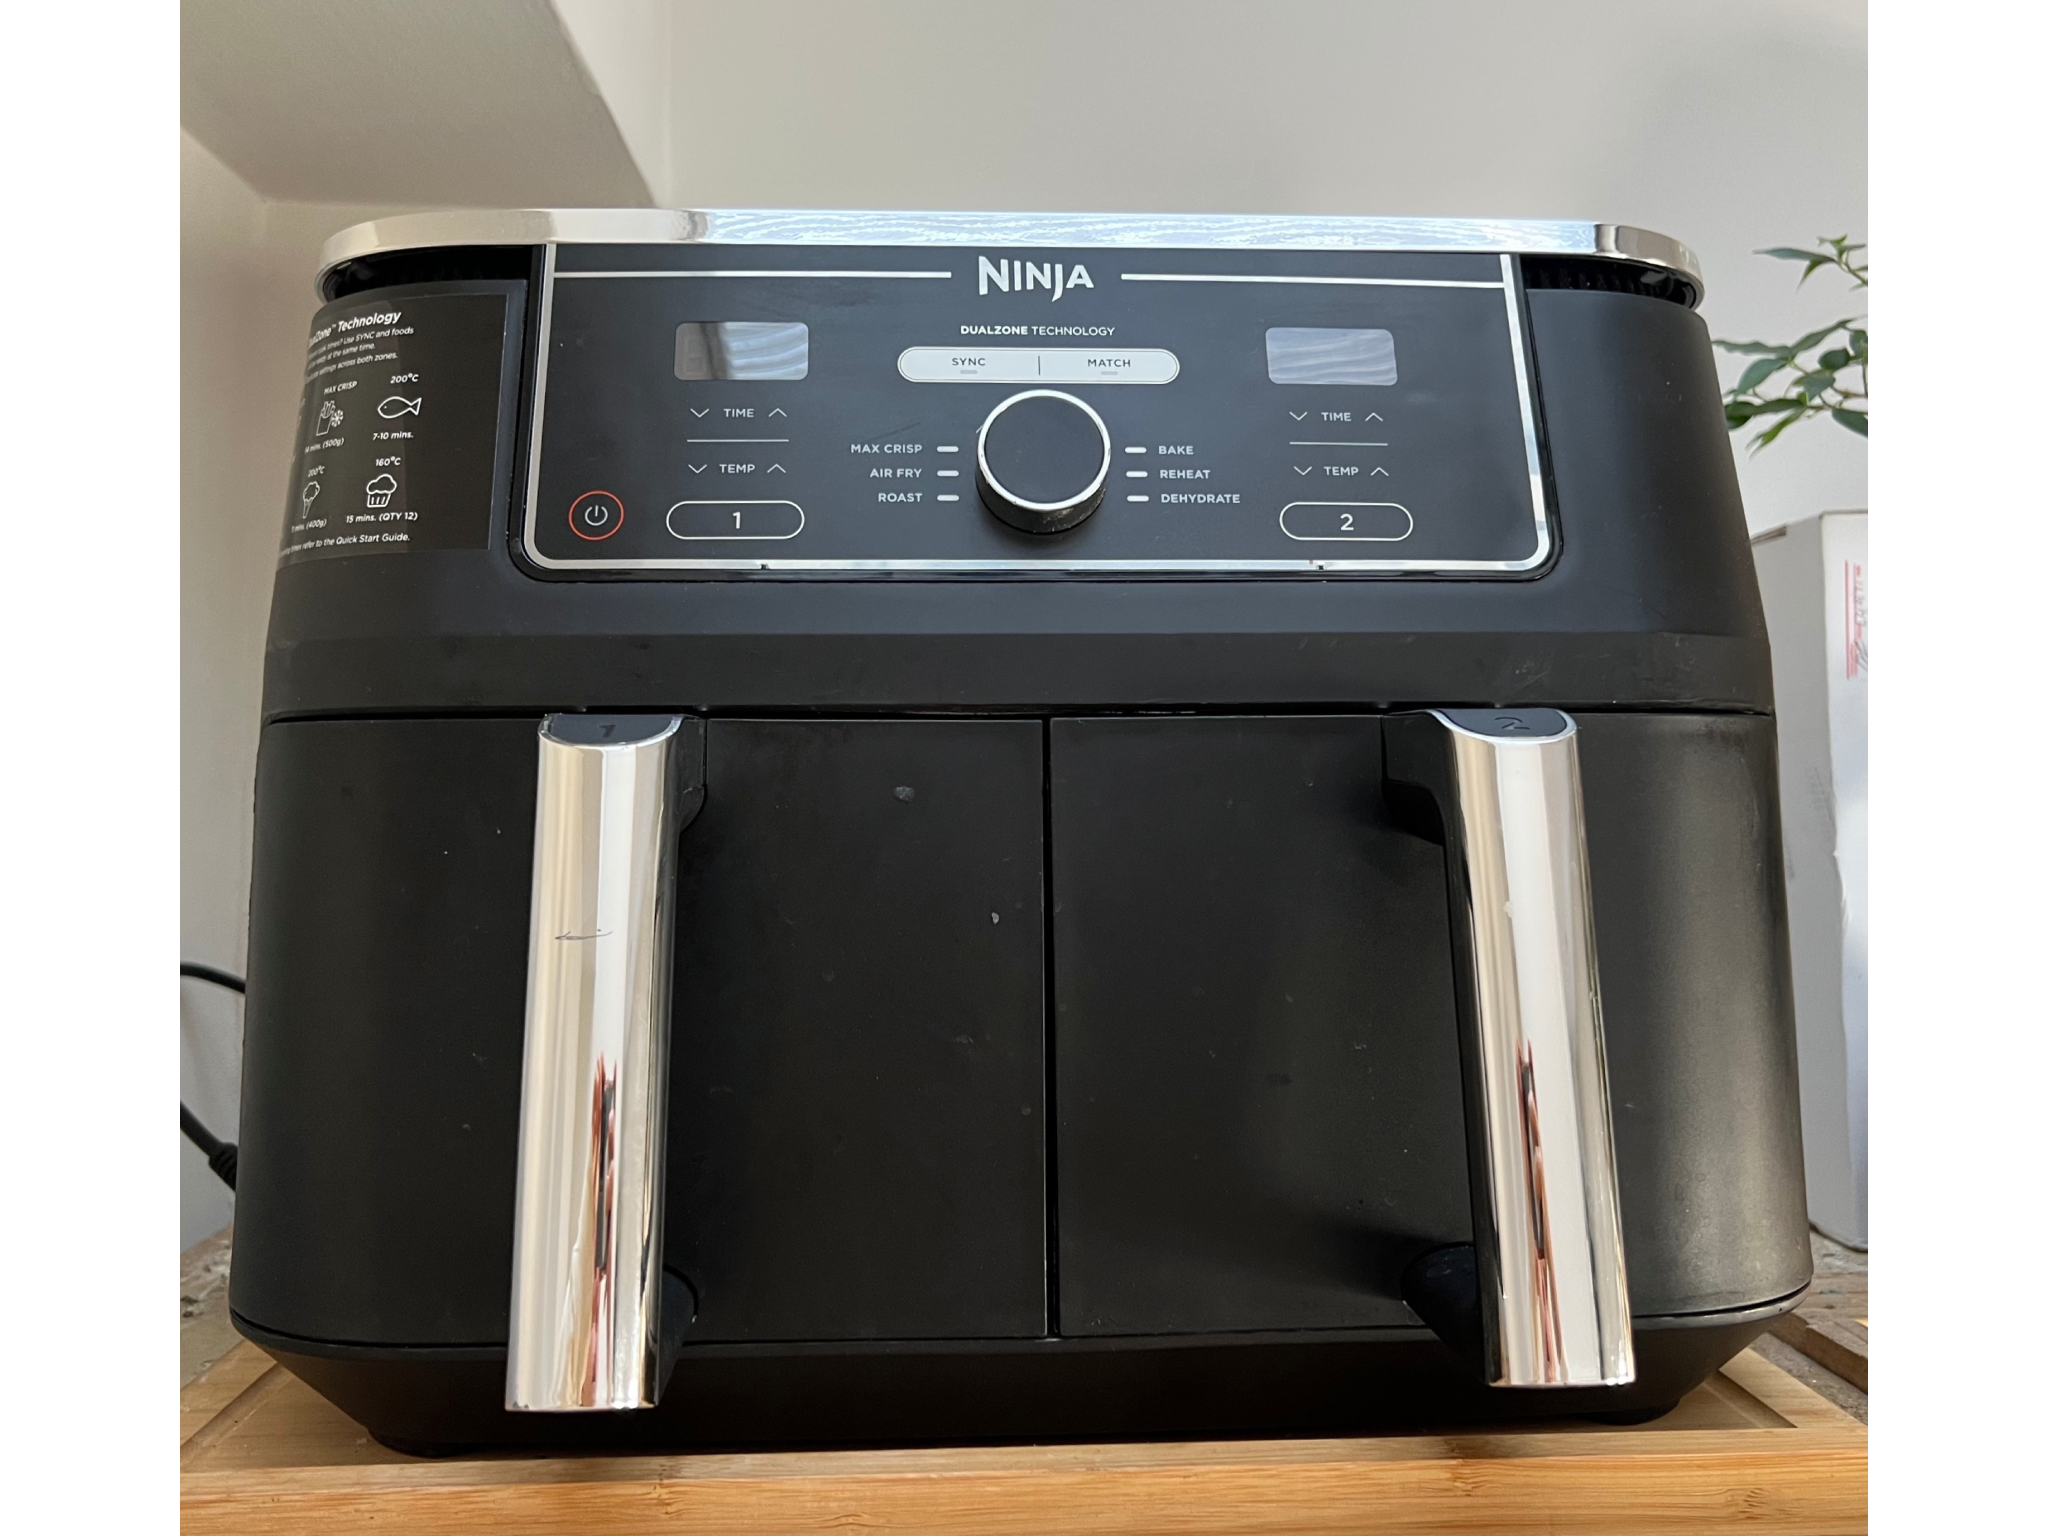 One of the best air fryers that we tested for this review